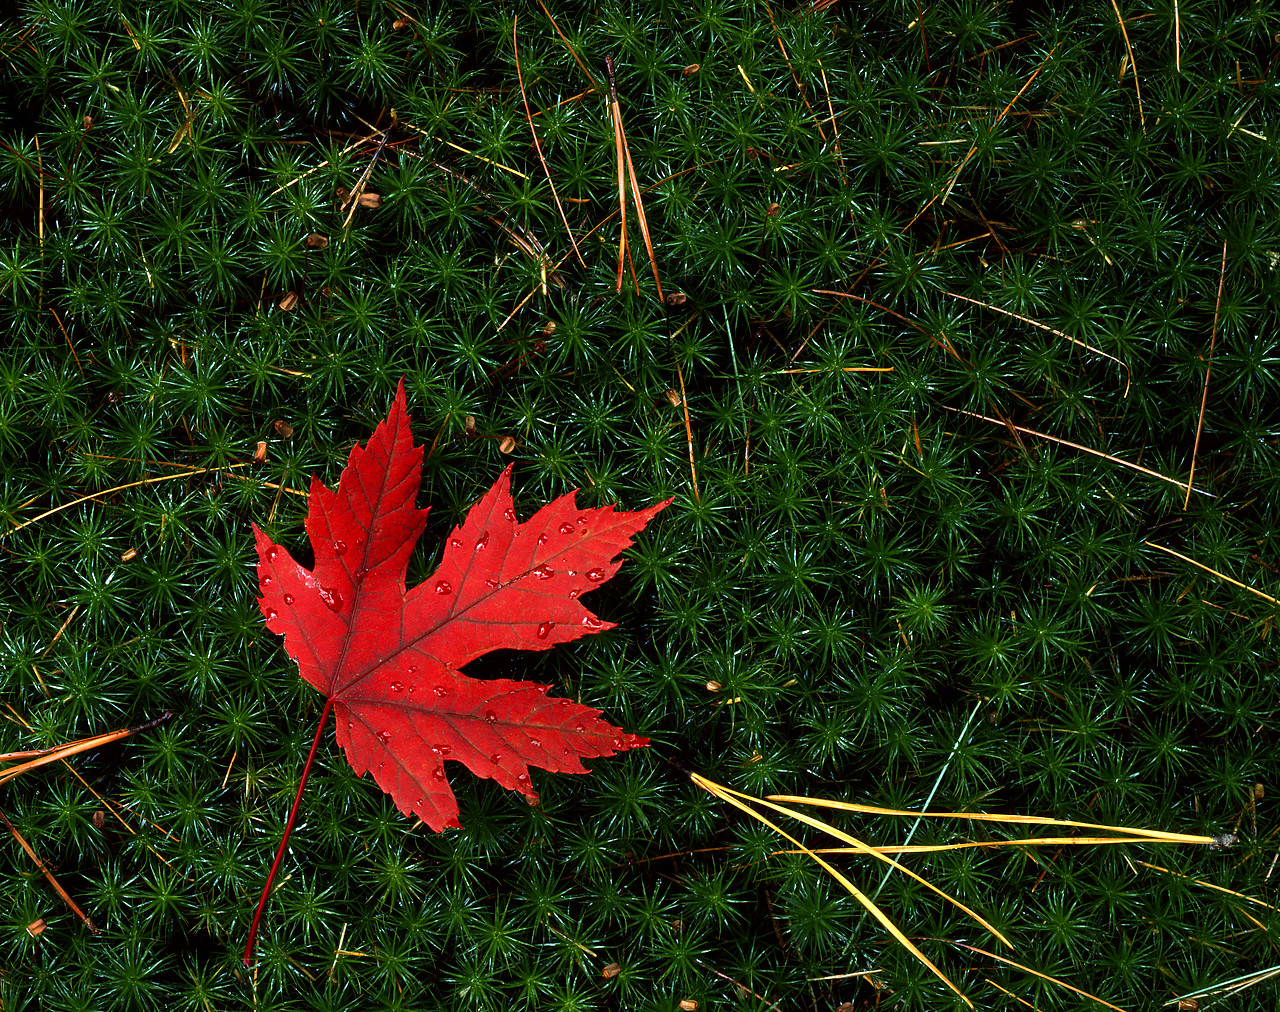 #903132-1 - Red Maple Leaf & Hair Moss, White Mountains, New Hampshire, USA